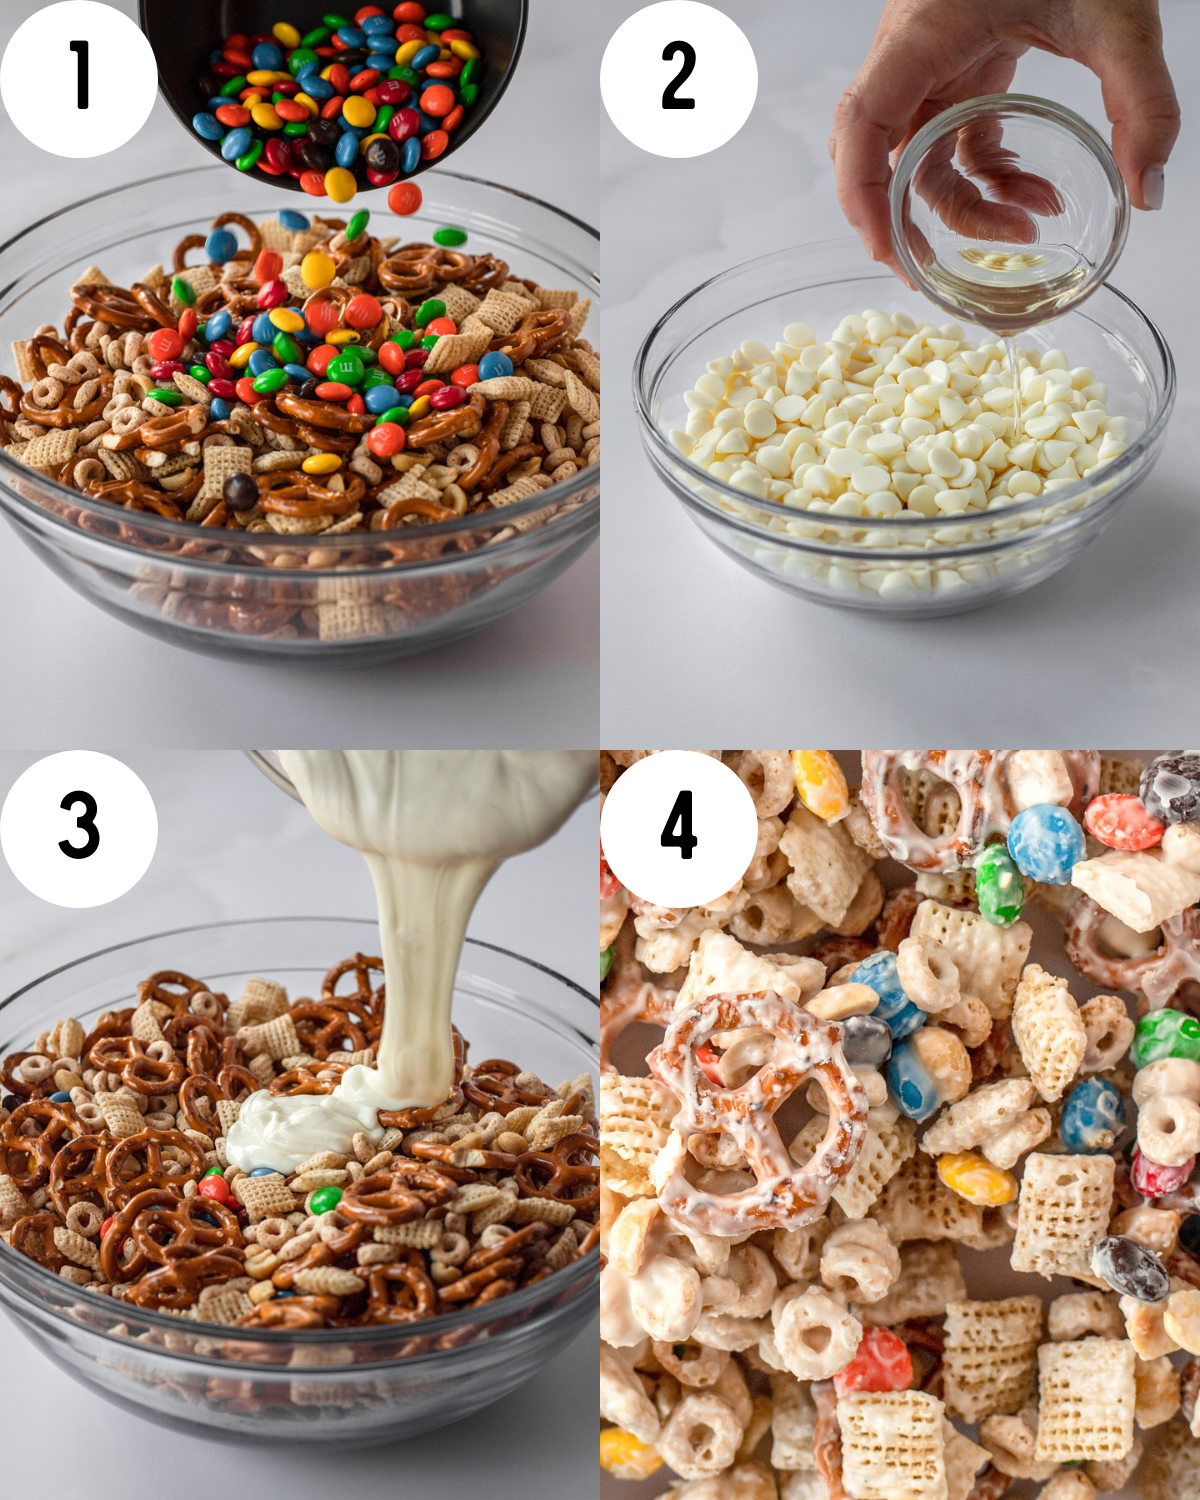 4 steps to make chex mix- mixing ingredients, melting oil and chocolate, pouring white chocolate on chex mix, spreading onto a sheet to dry. 